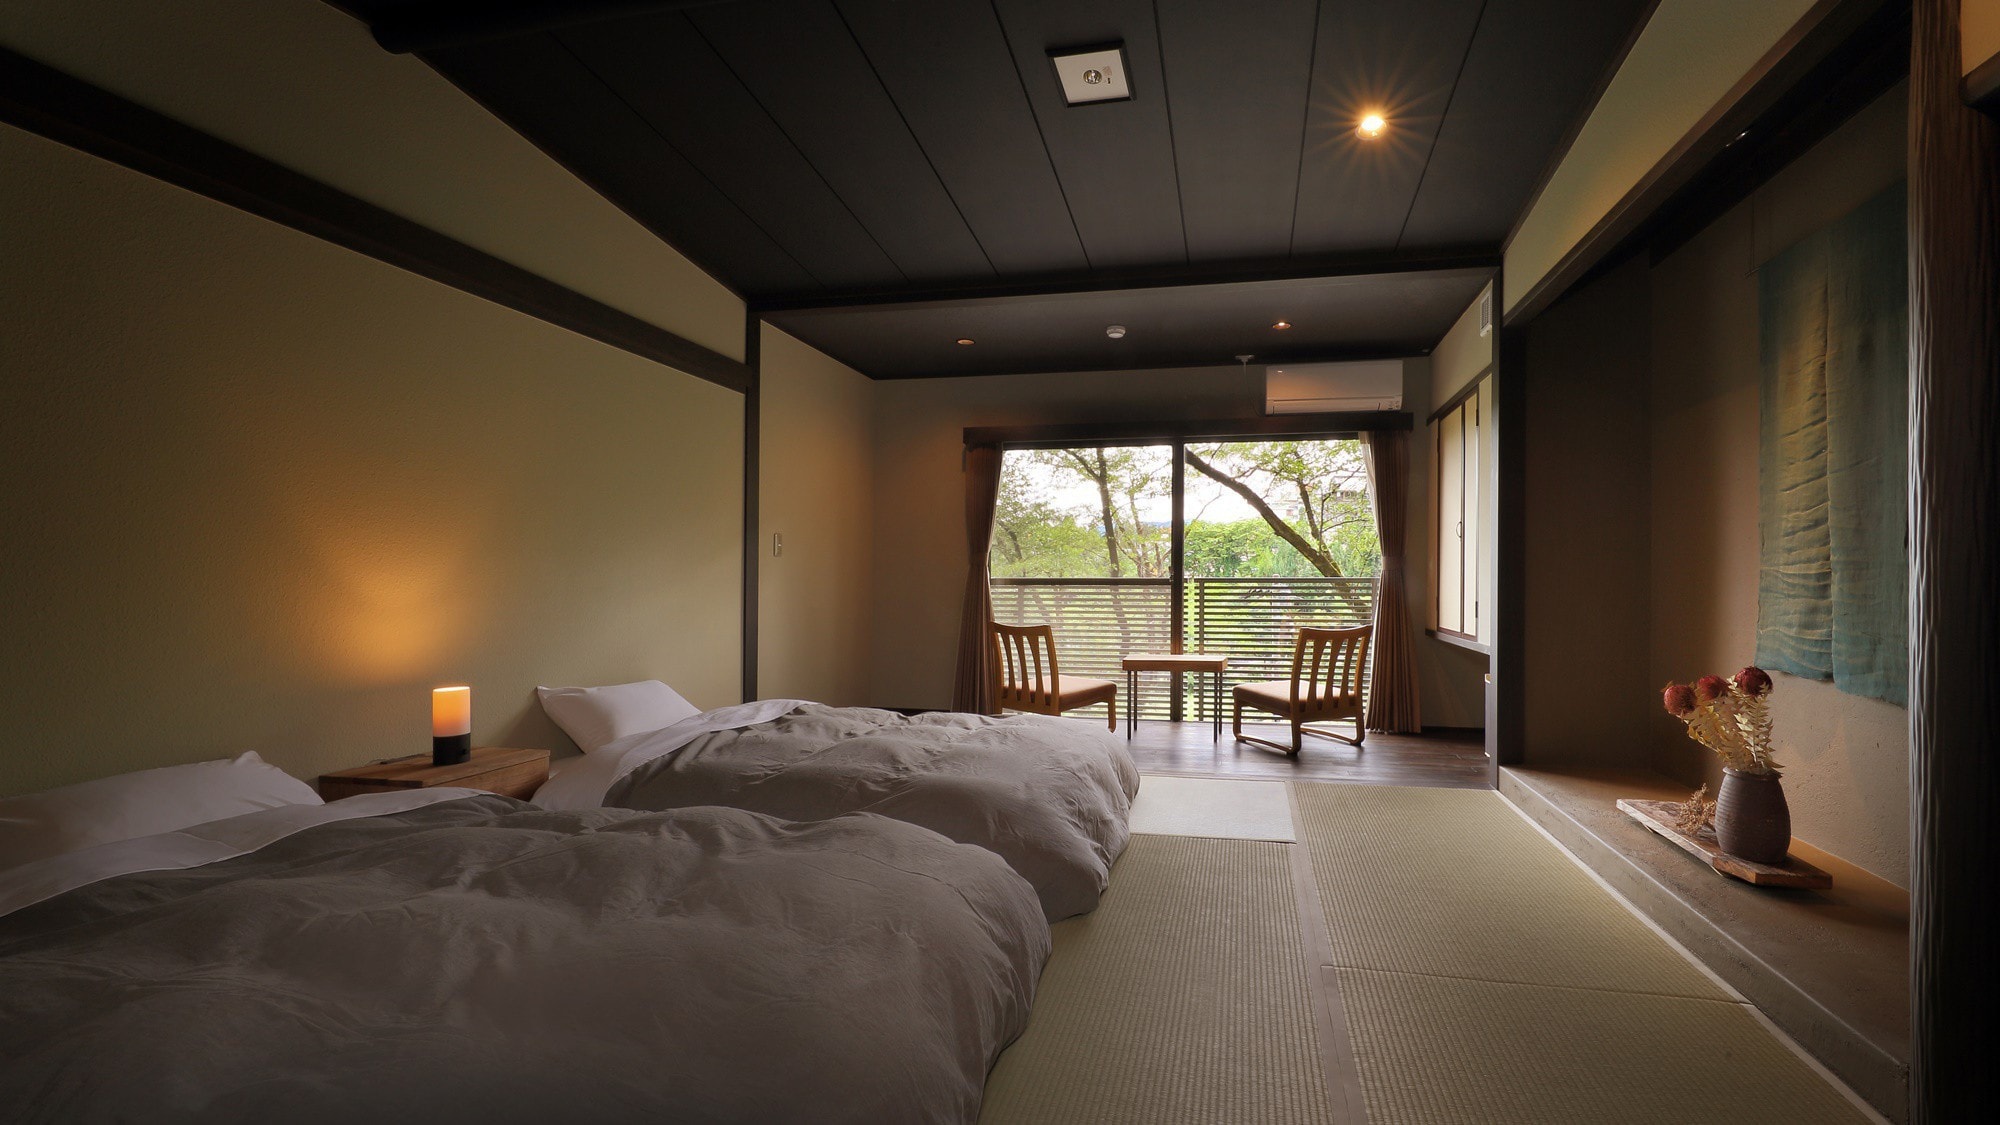 [Standard] There are 2 modern low-rise beds and a wide veranda. This is the most common room type in Mori no Oto.